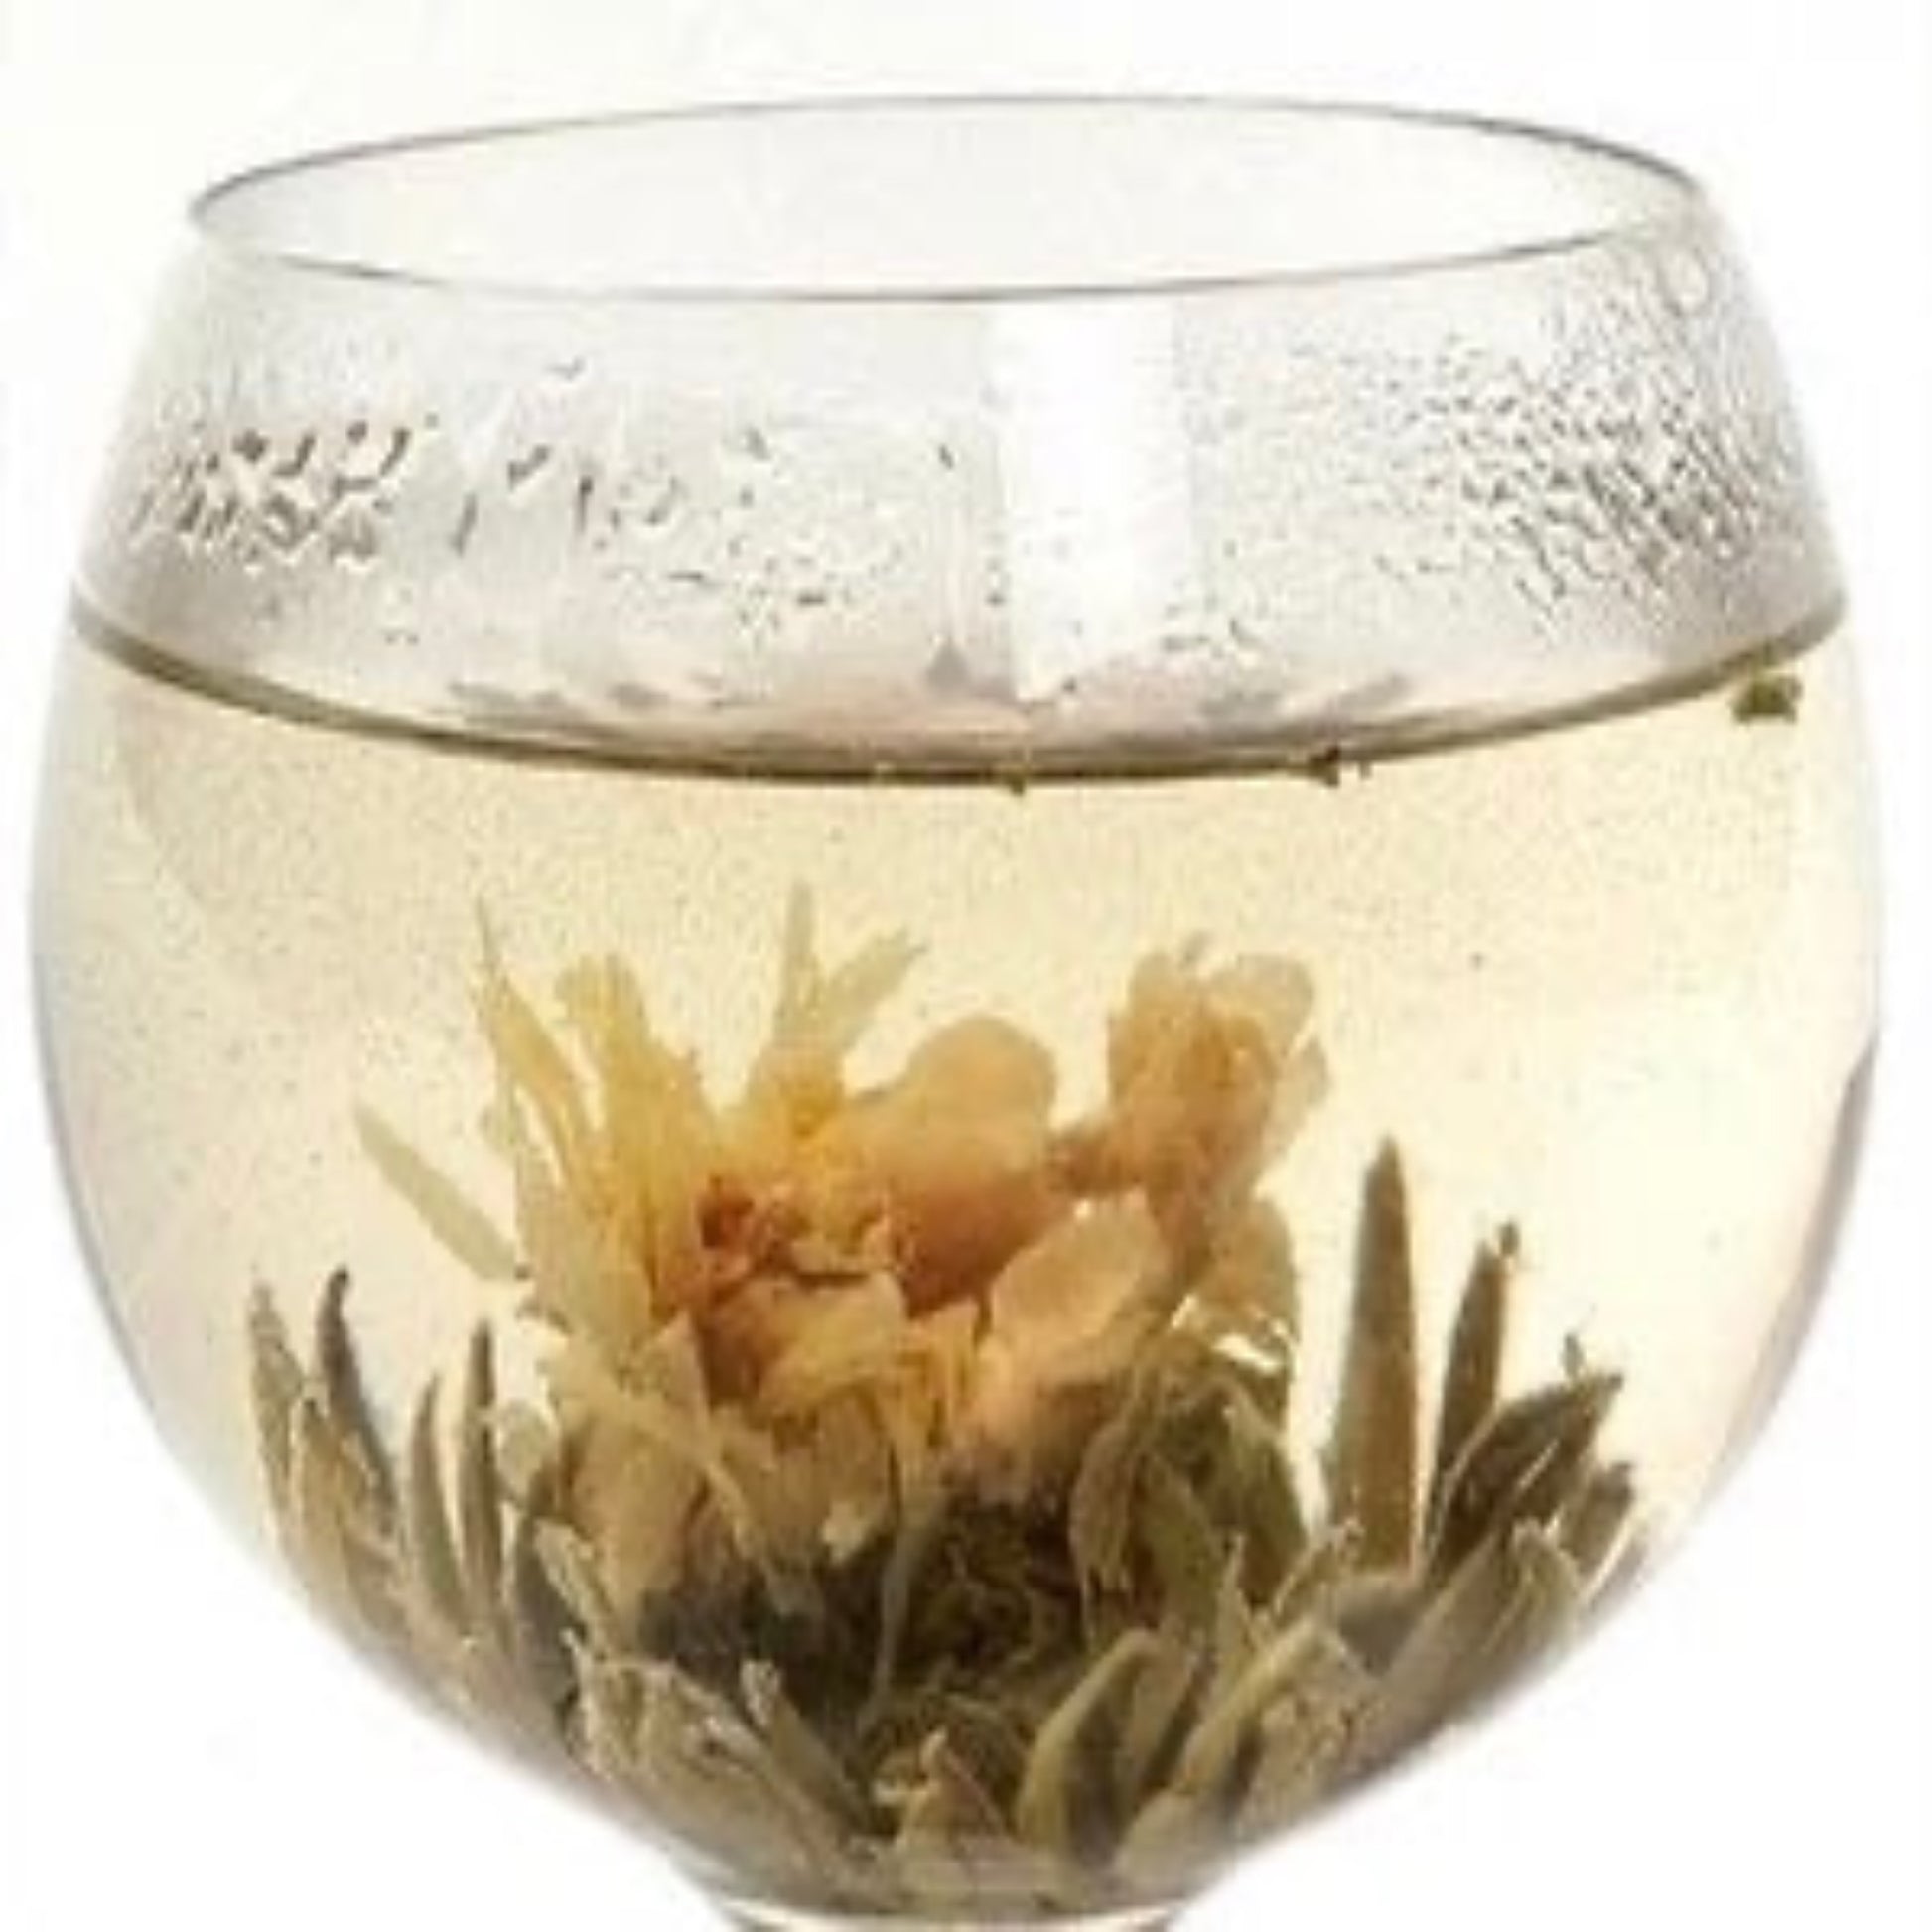 Blooming tea ball in glass of hot water